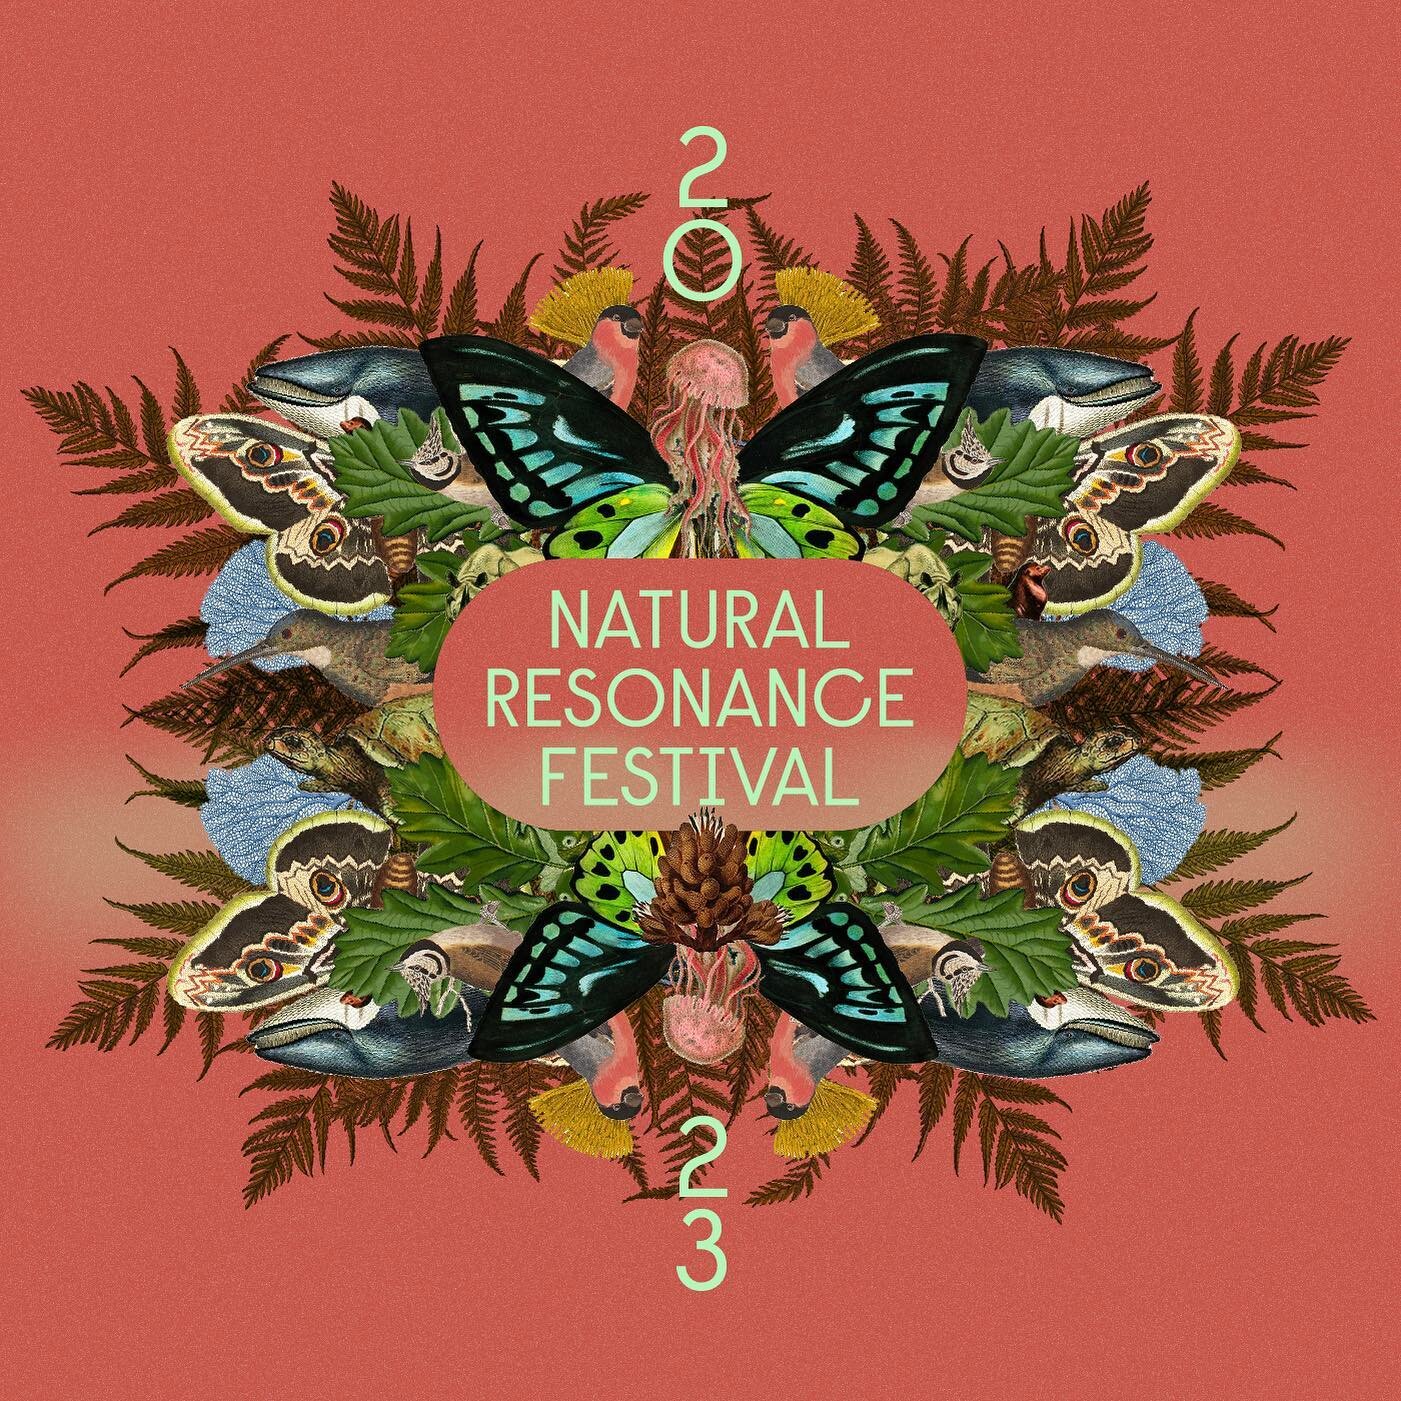 Hey there artists, musicians, poets, and other folk, is your creative practice inspired by nature, or made in relationship with the more-than-human world?

The second annual Natural Resonance Festival is now open to applicants! Visit @naturalresonanc